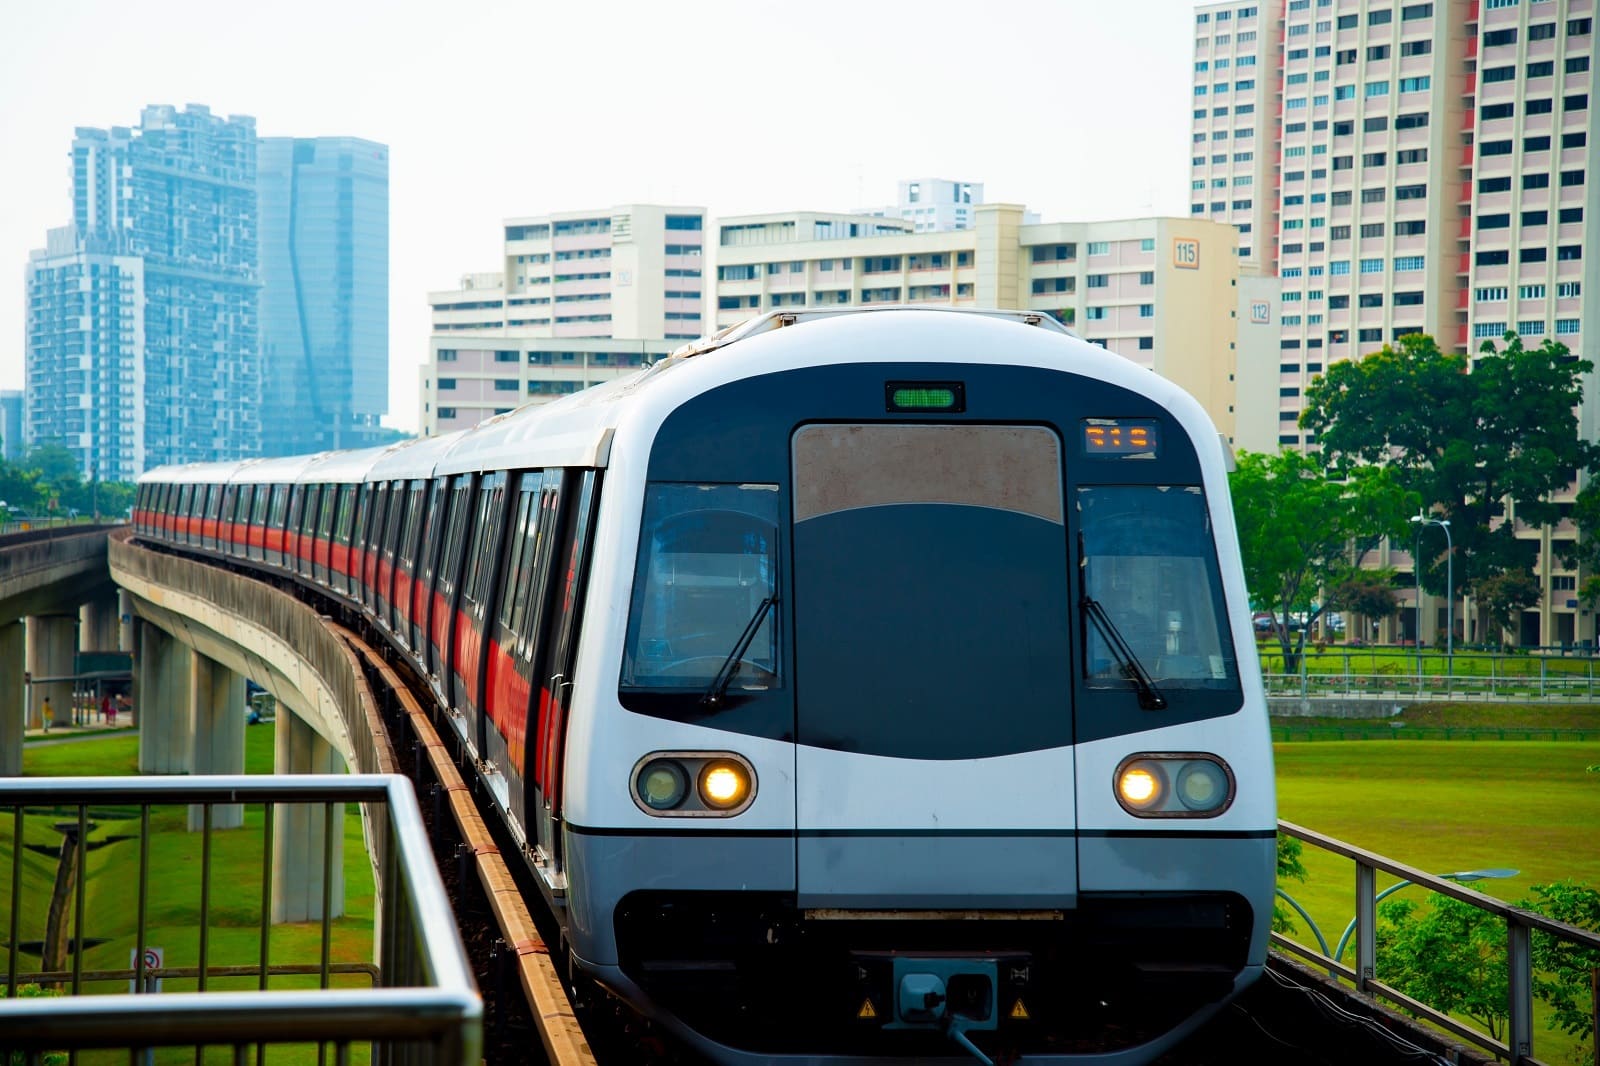 <p><span>Singapore’s Mass Rapid Transit (MRT) system is a efficient and clean public transportation model. The network covers most of the city-state, including major tourist attractions, shopping districts, and the airport. </span></p> <p><b>Insider’s Tip: </b><span>Opt for the Singapore Tourist Pass for unlimited travel on the MRT and bus services. </span></p> <p><strong>When to Travel: </strong>Midday or late evening to avoid rush hour crowds. </p>